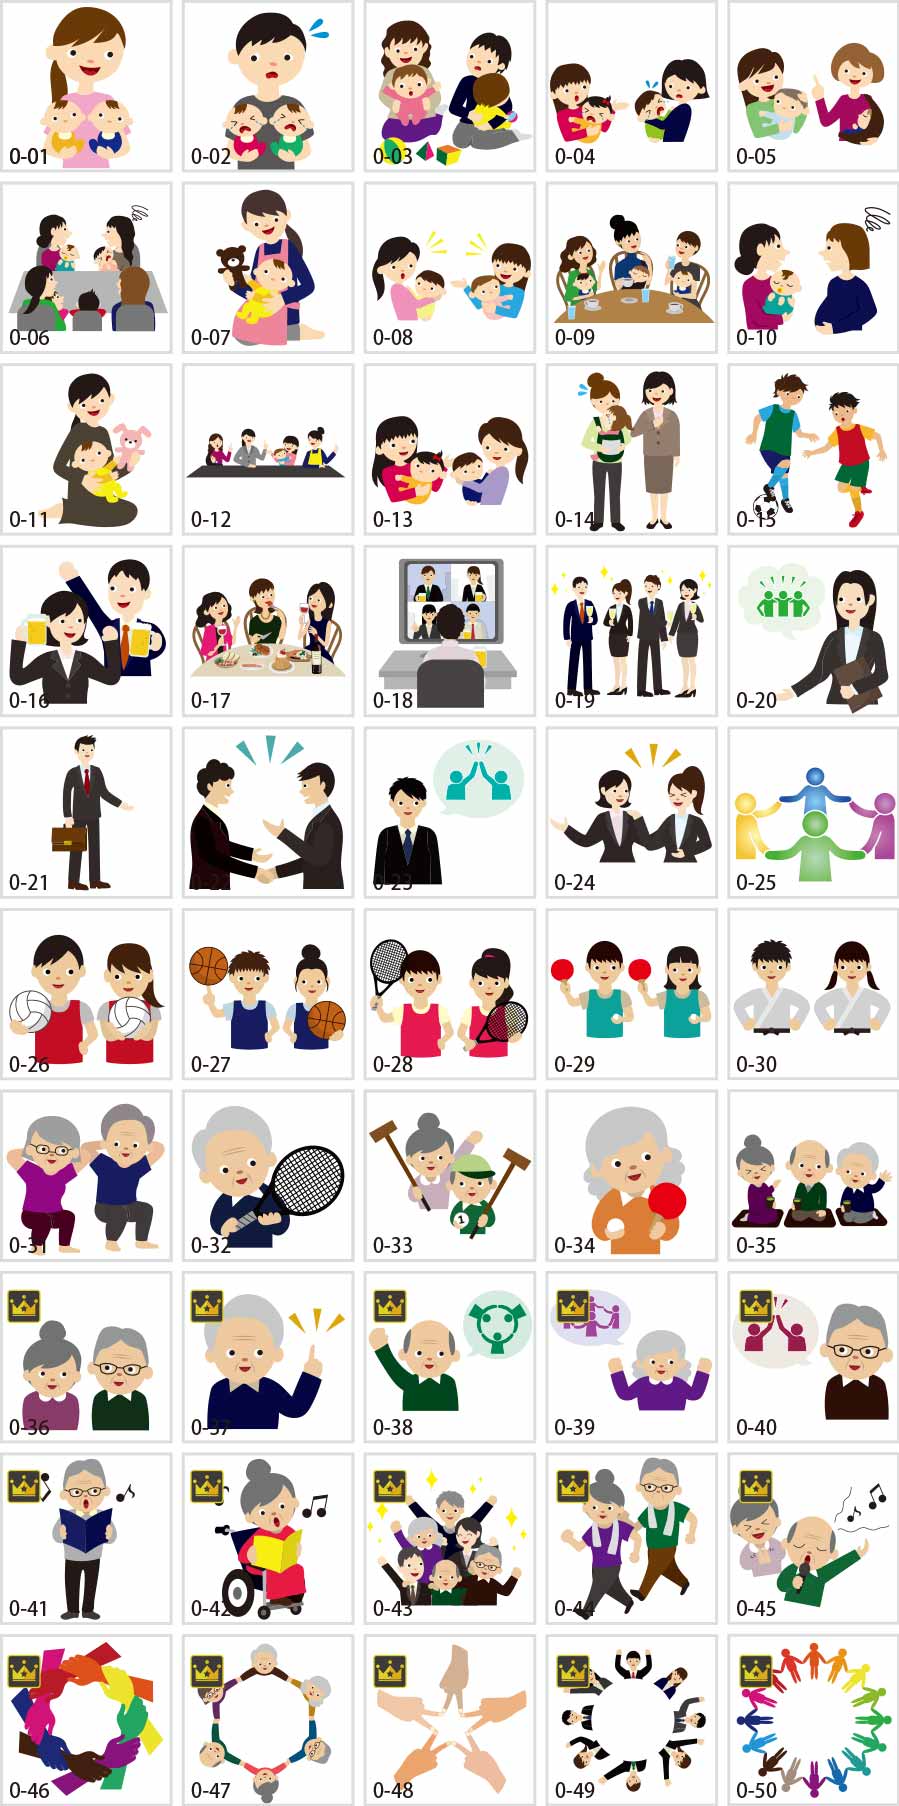 Illustrations of various club activities